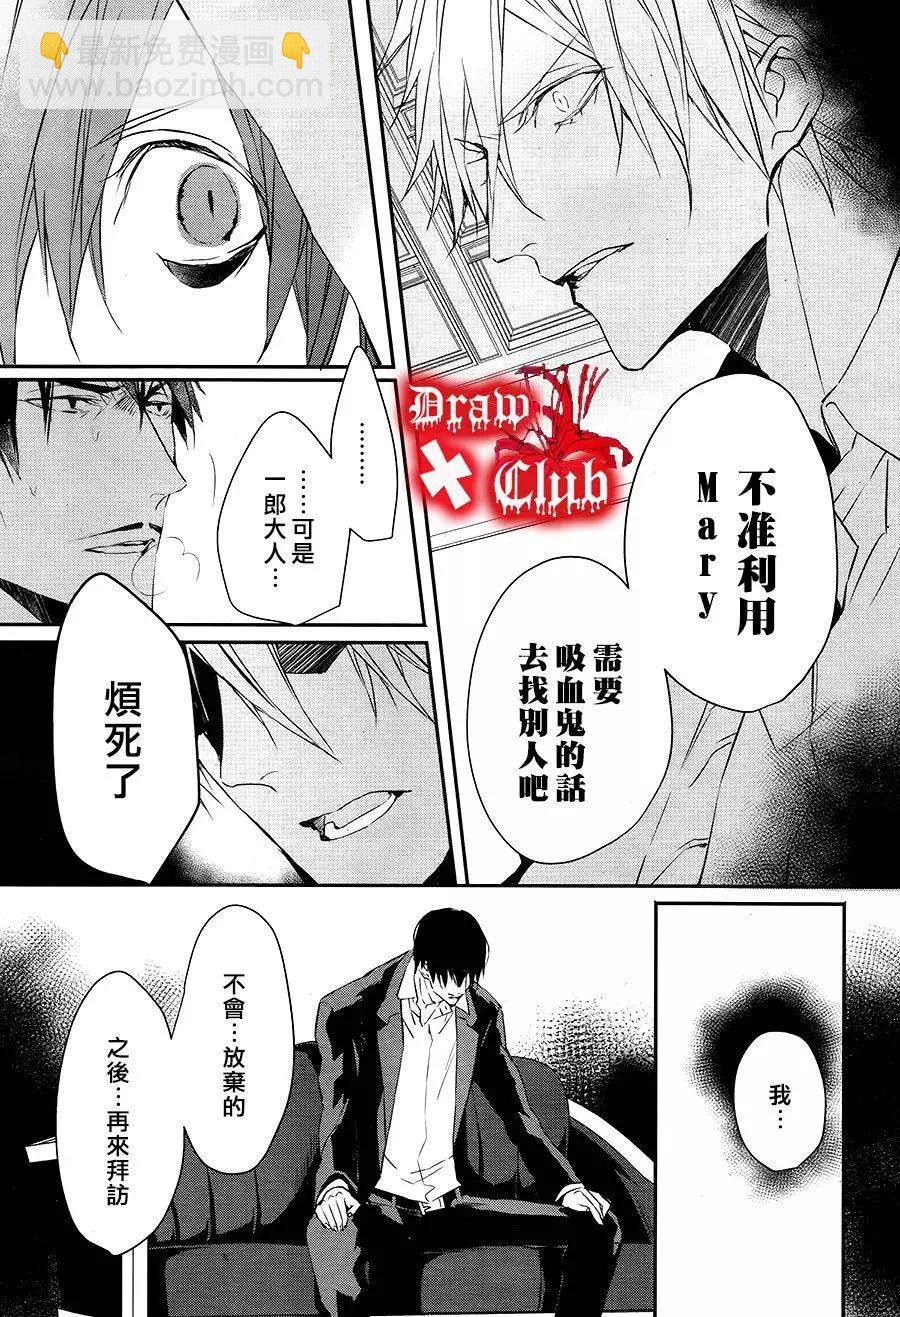 Bloody Mary - 第28回 - 6